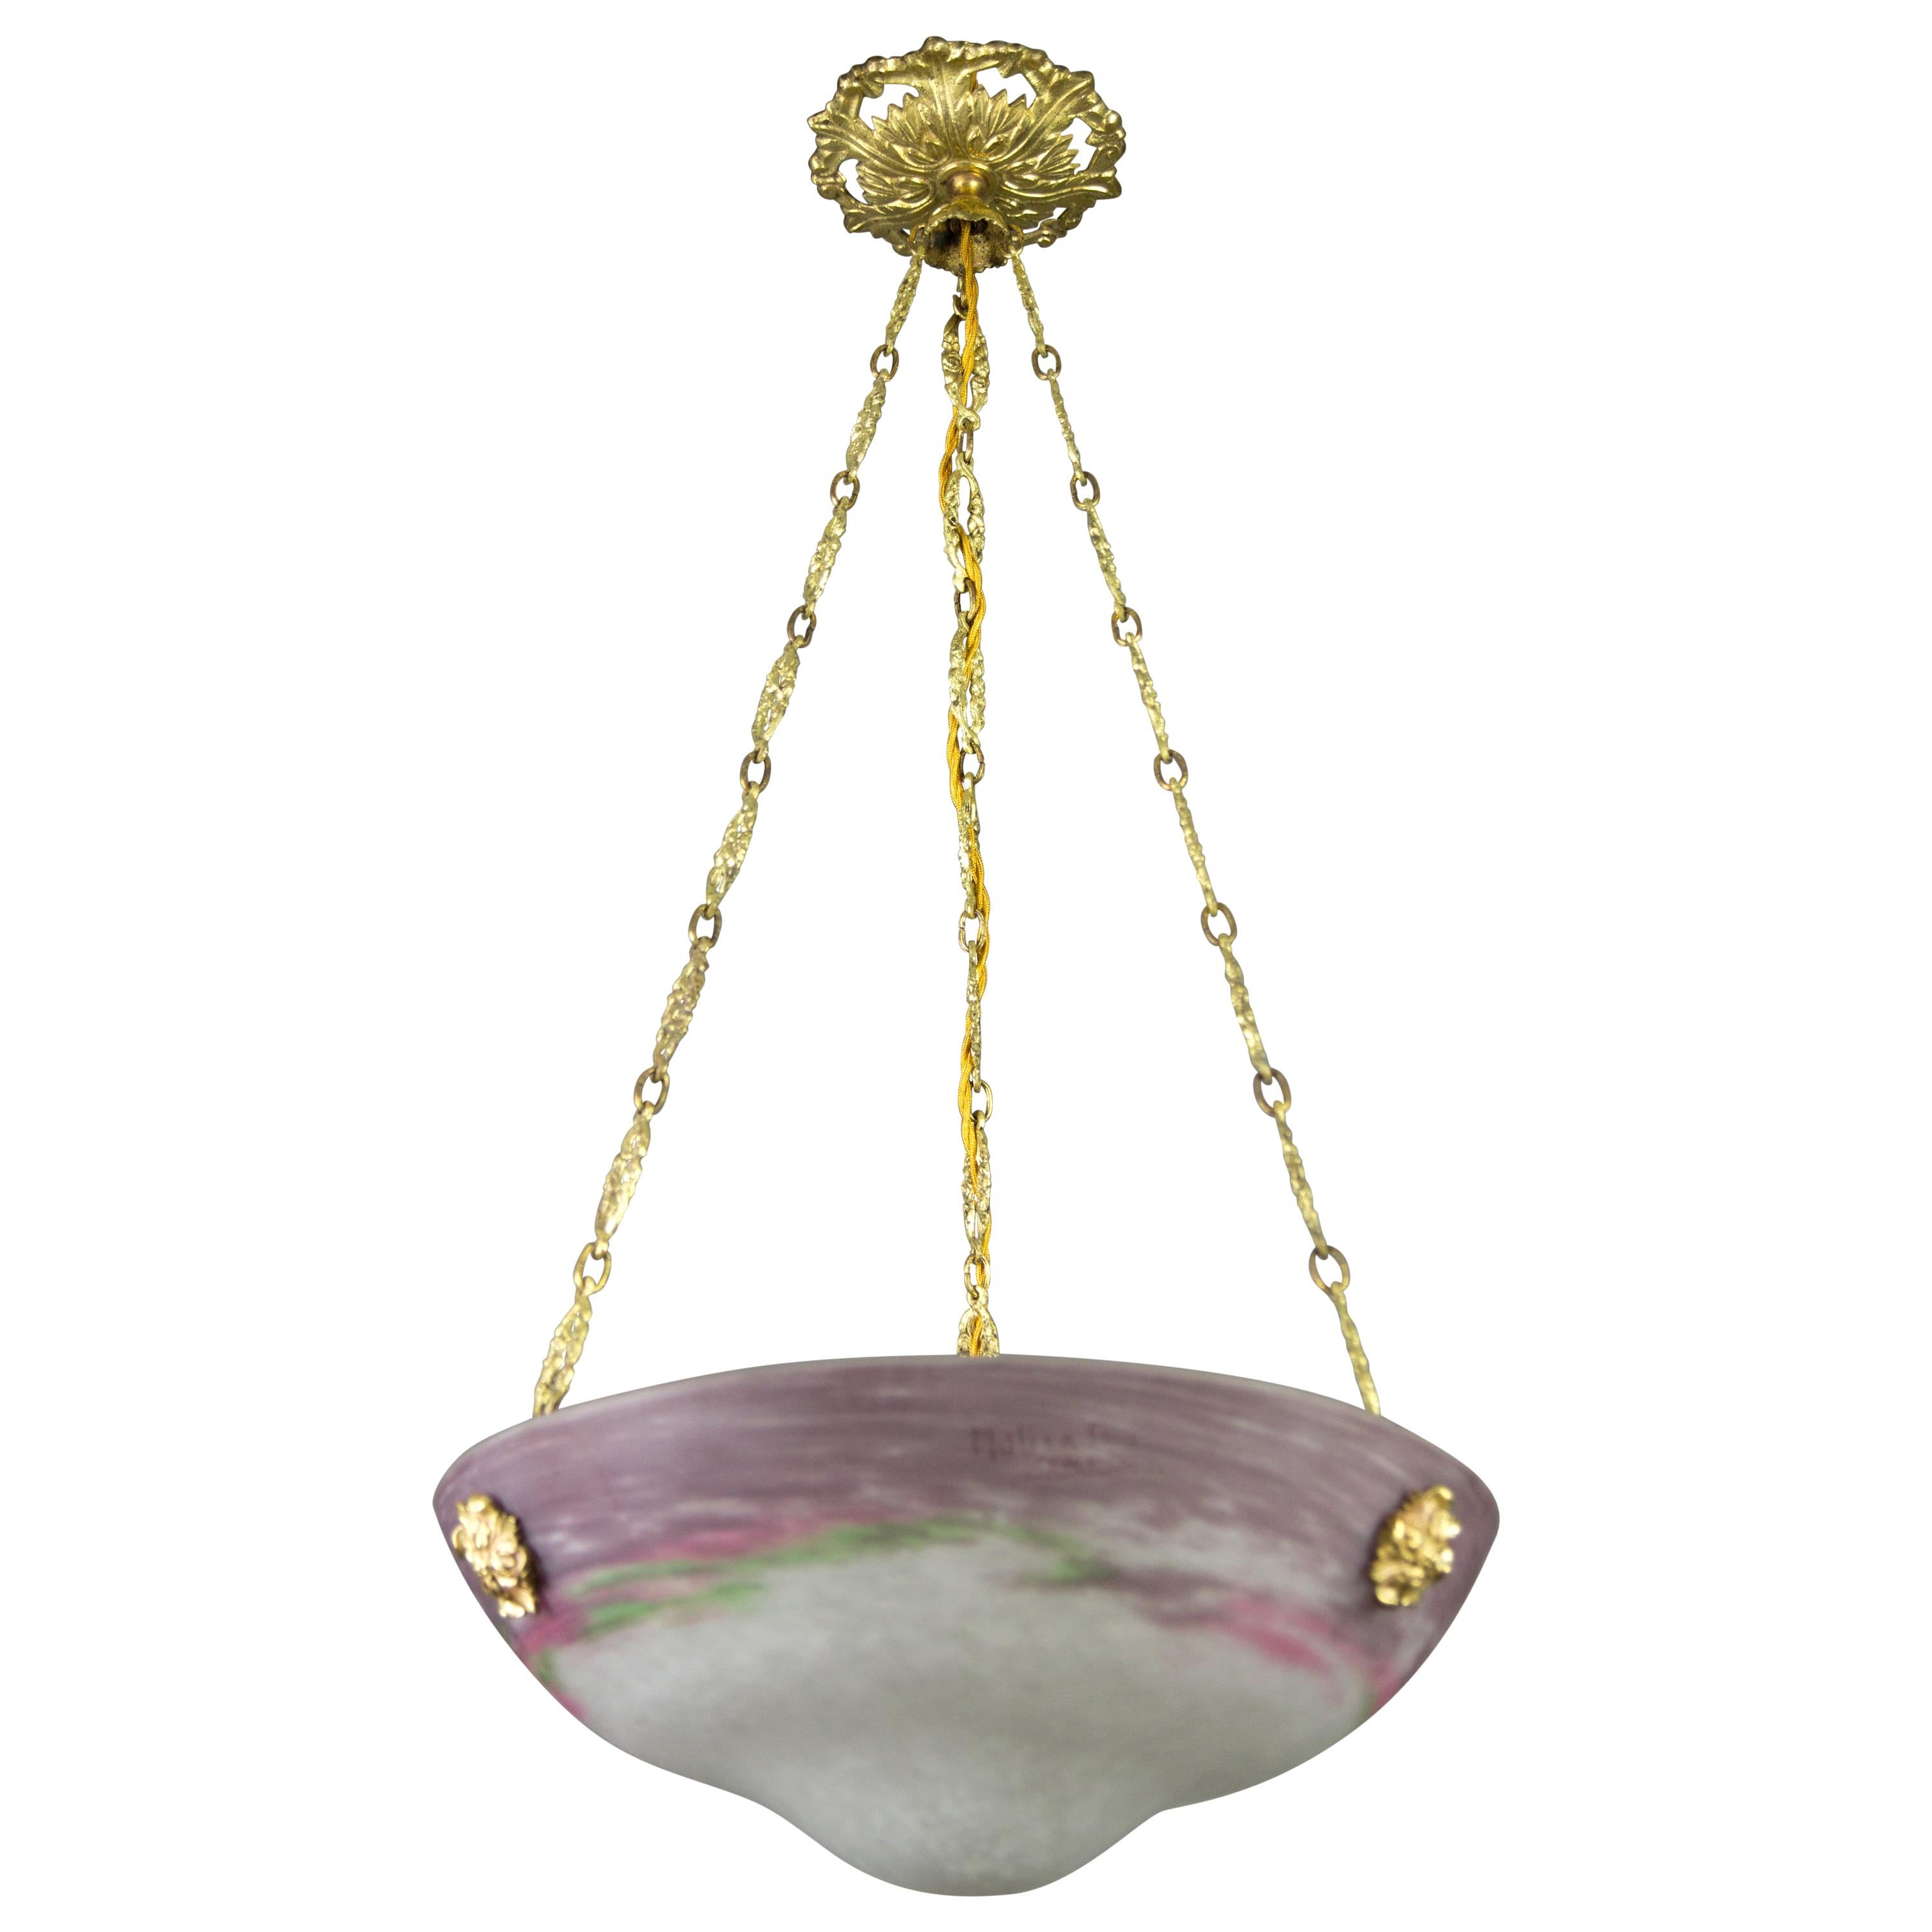 French Art Nouveau Glass Bowl Pendant Chandelier Signed by Muller Frères, 1920s For Sale